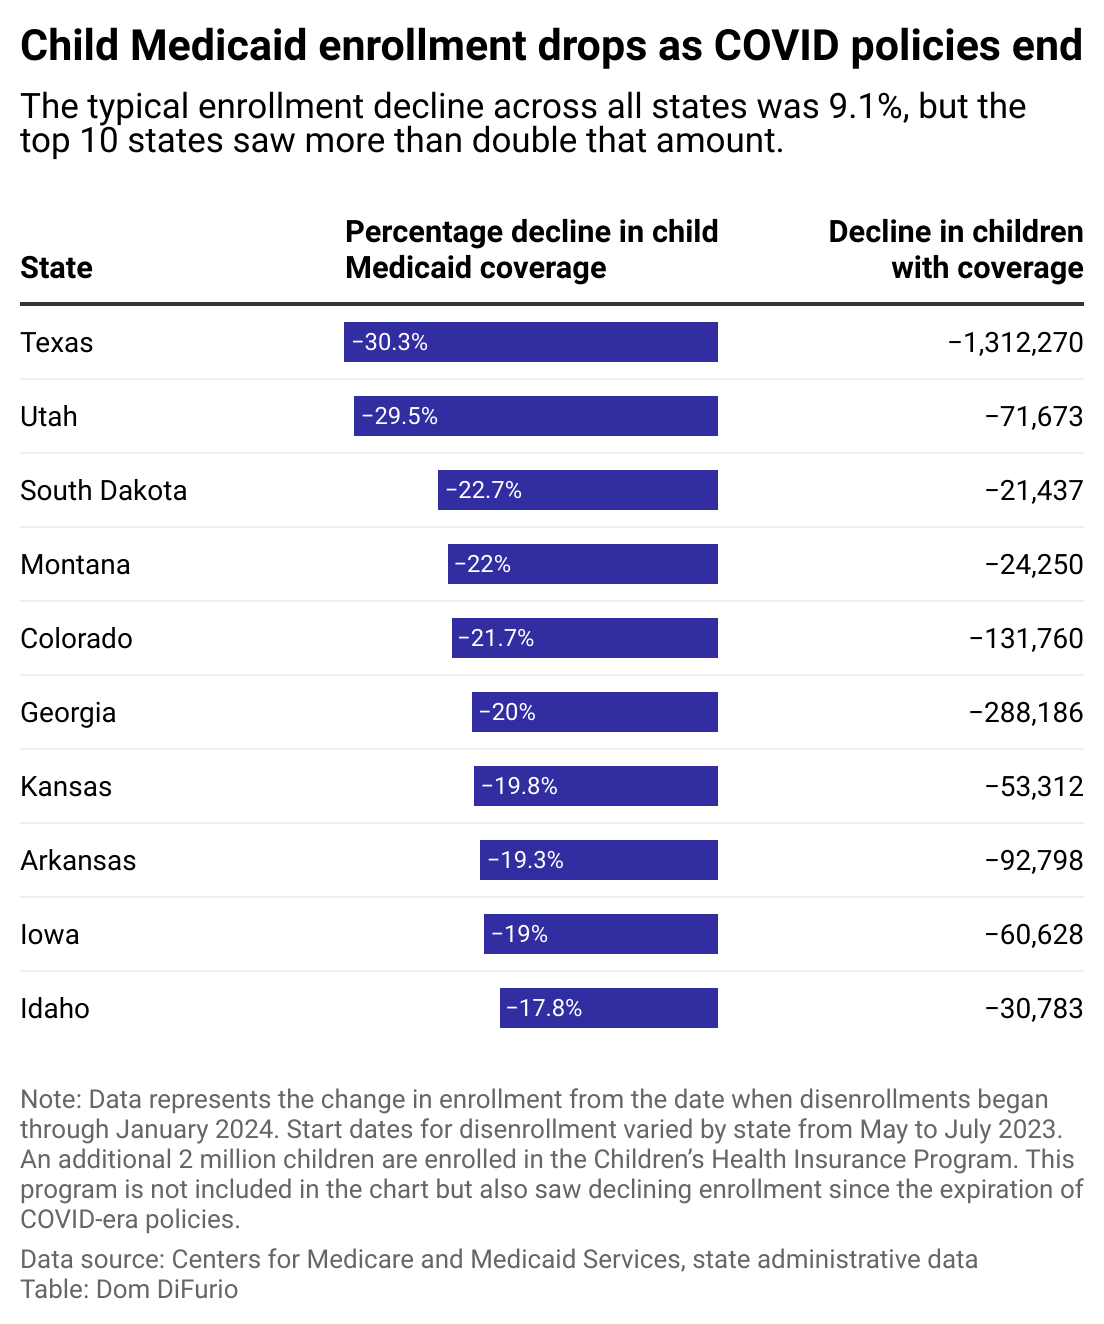 A bar chart showing the percentage decline in total children covered by Medicaid policies. The 10 states with the largest declines are depicted. Texas leads with a 30% drop from May through December 2023. The next largest declines were in Utah, South Dakota, Montana, Colorado, and Georgia.